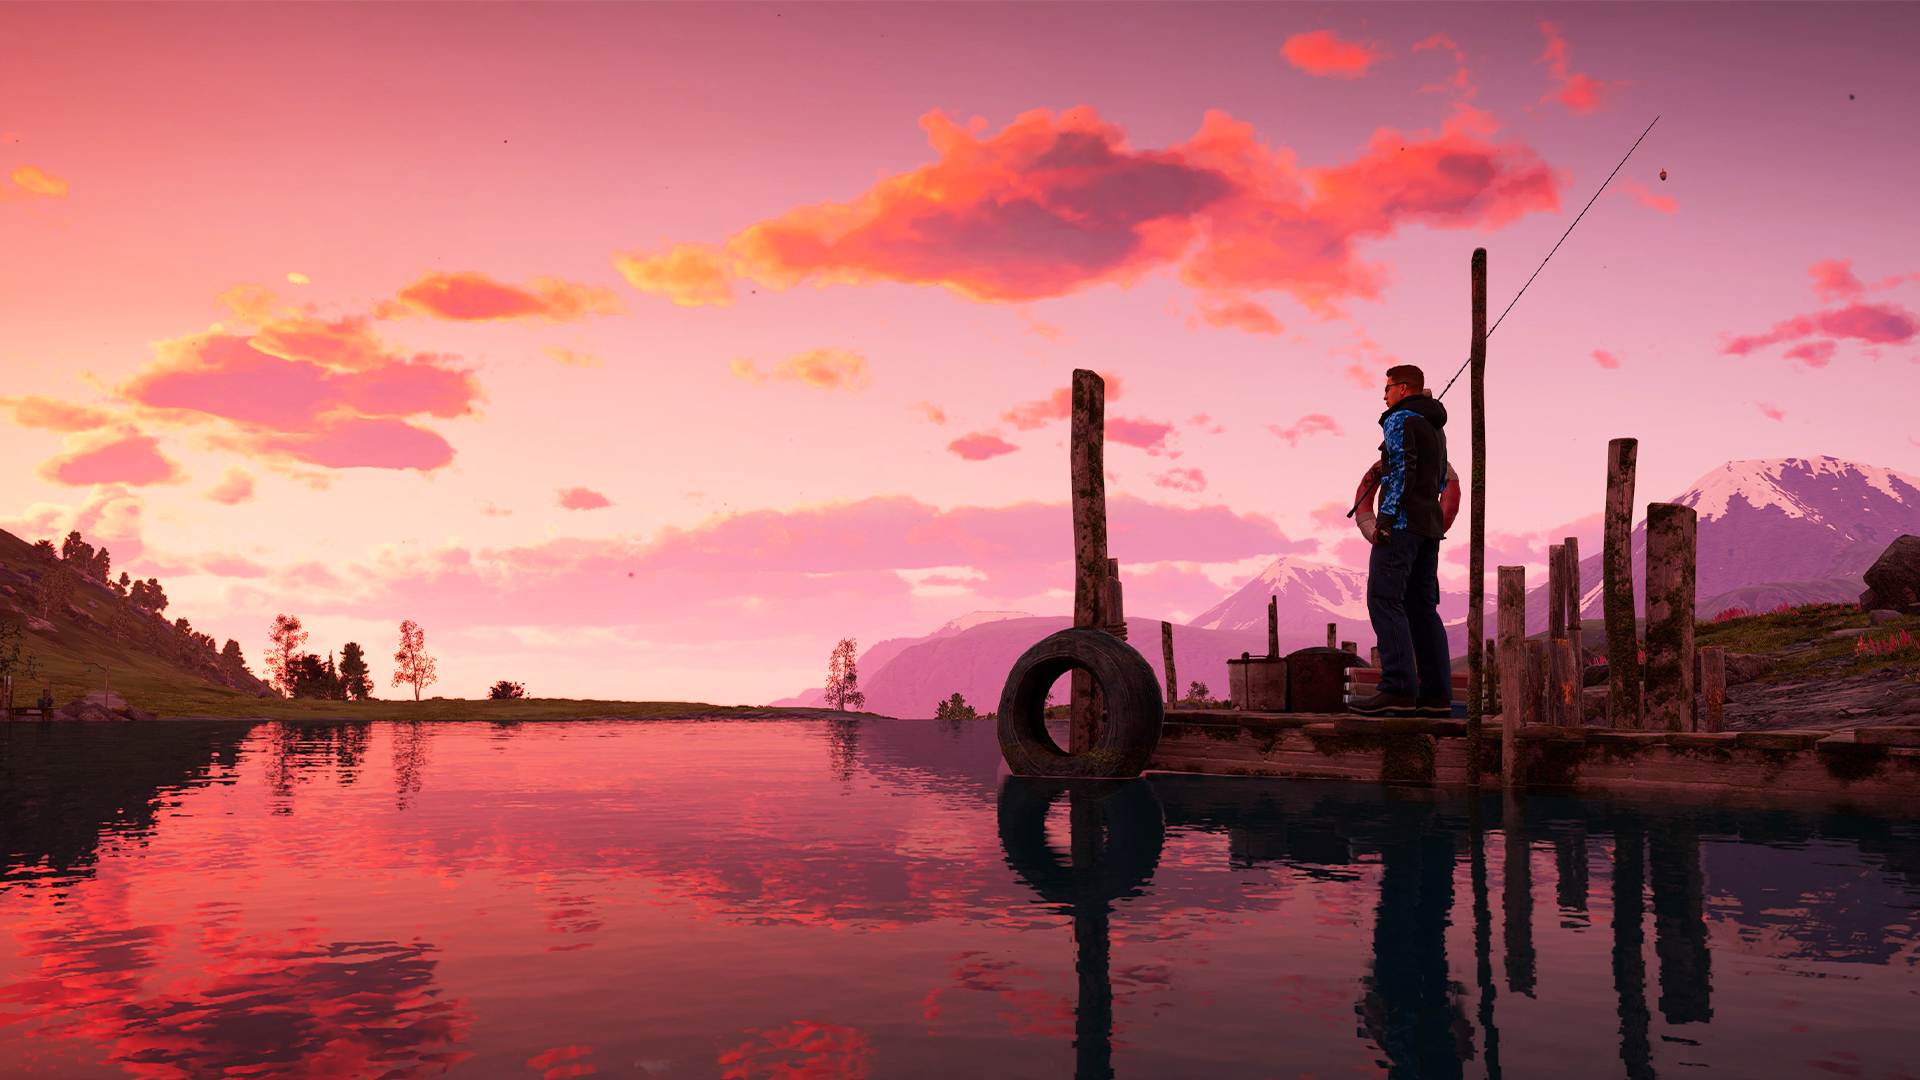 An player enjoying a vibrant sunset in The Angler.